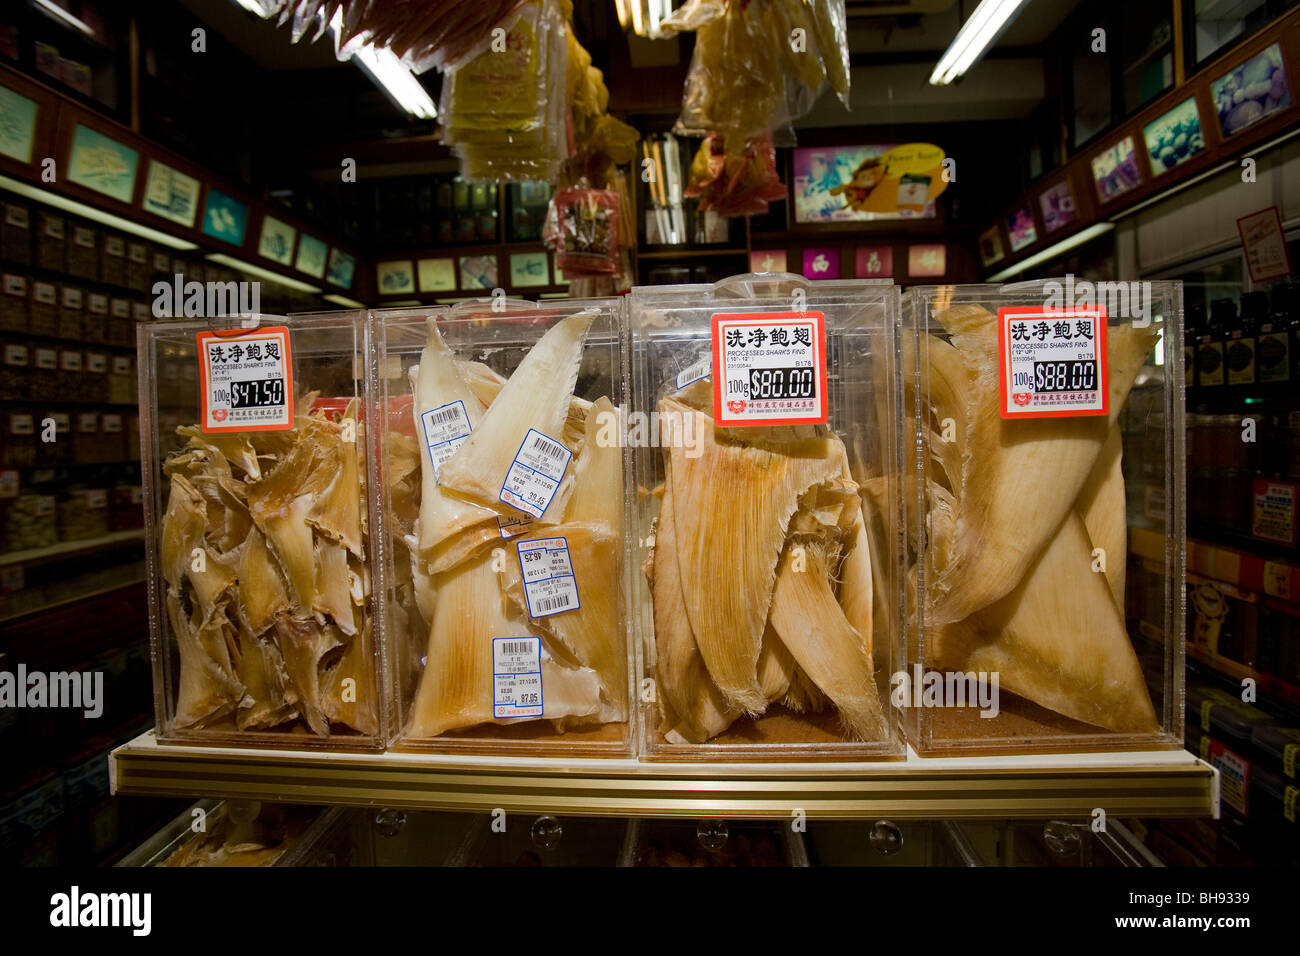 Dried Shark Fins in Store for Sale, Chinatown, Singapore Stock Photo